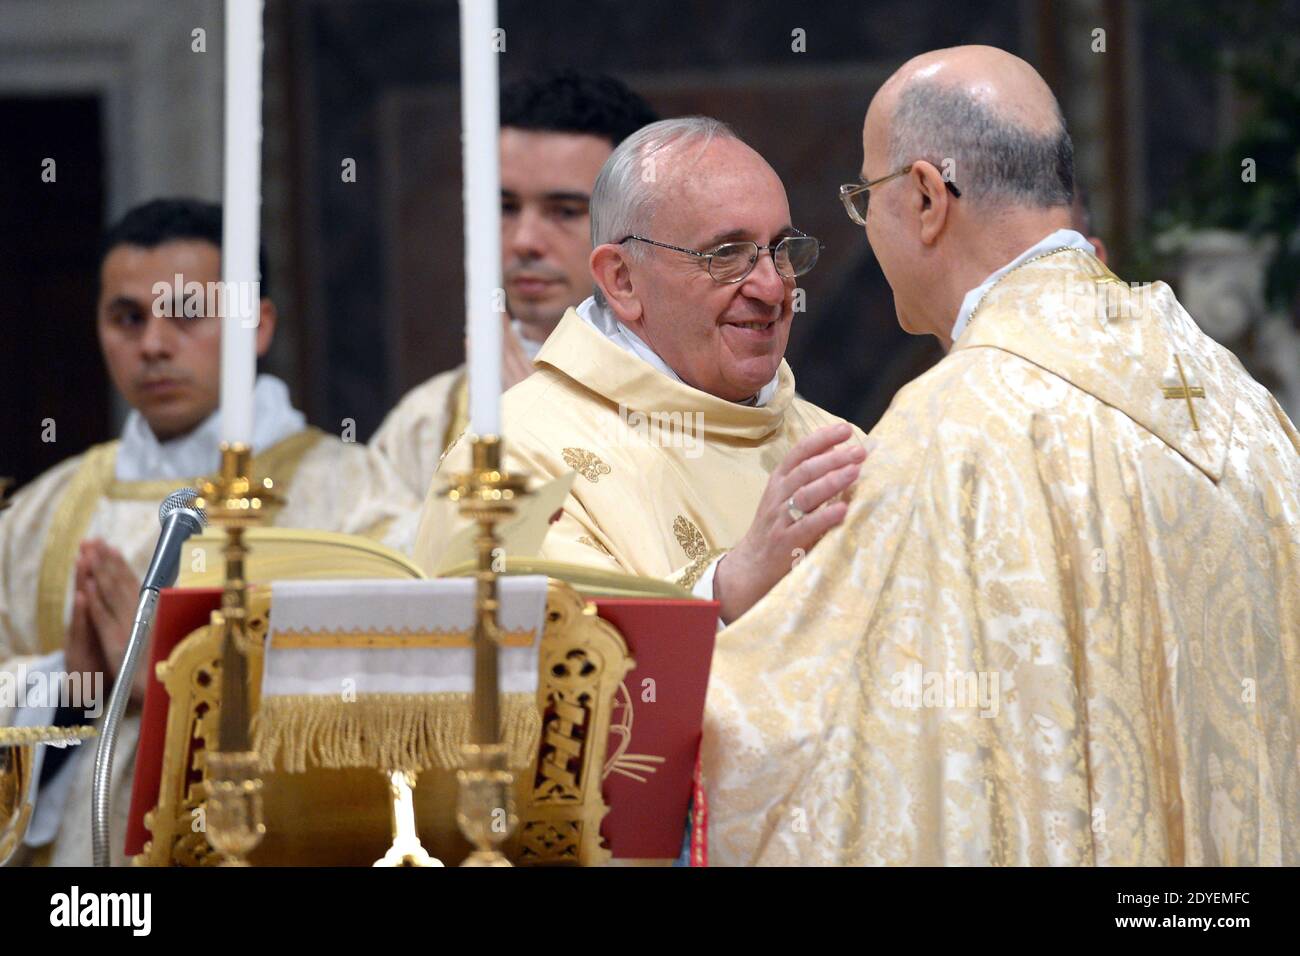 Pope Francis, the newly elected leader of the Catholic Church, took part in his first mass, inside the Sistine Chapel at the Vatican on March 14, 2013. At right : cardinal Tarcisio Bertone. Photo by ABACAPRESS.COM Stock Photo